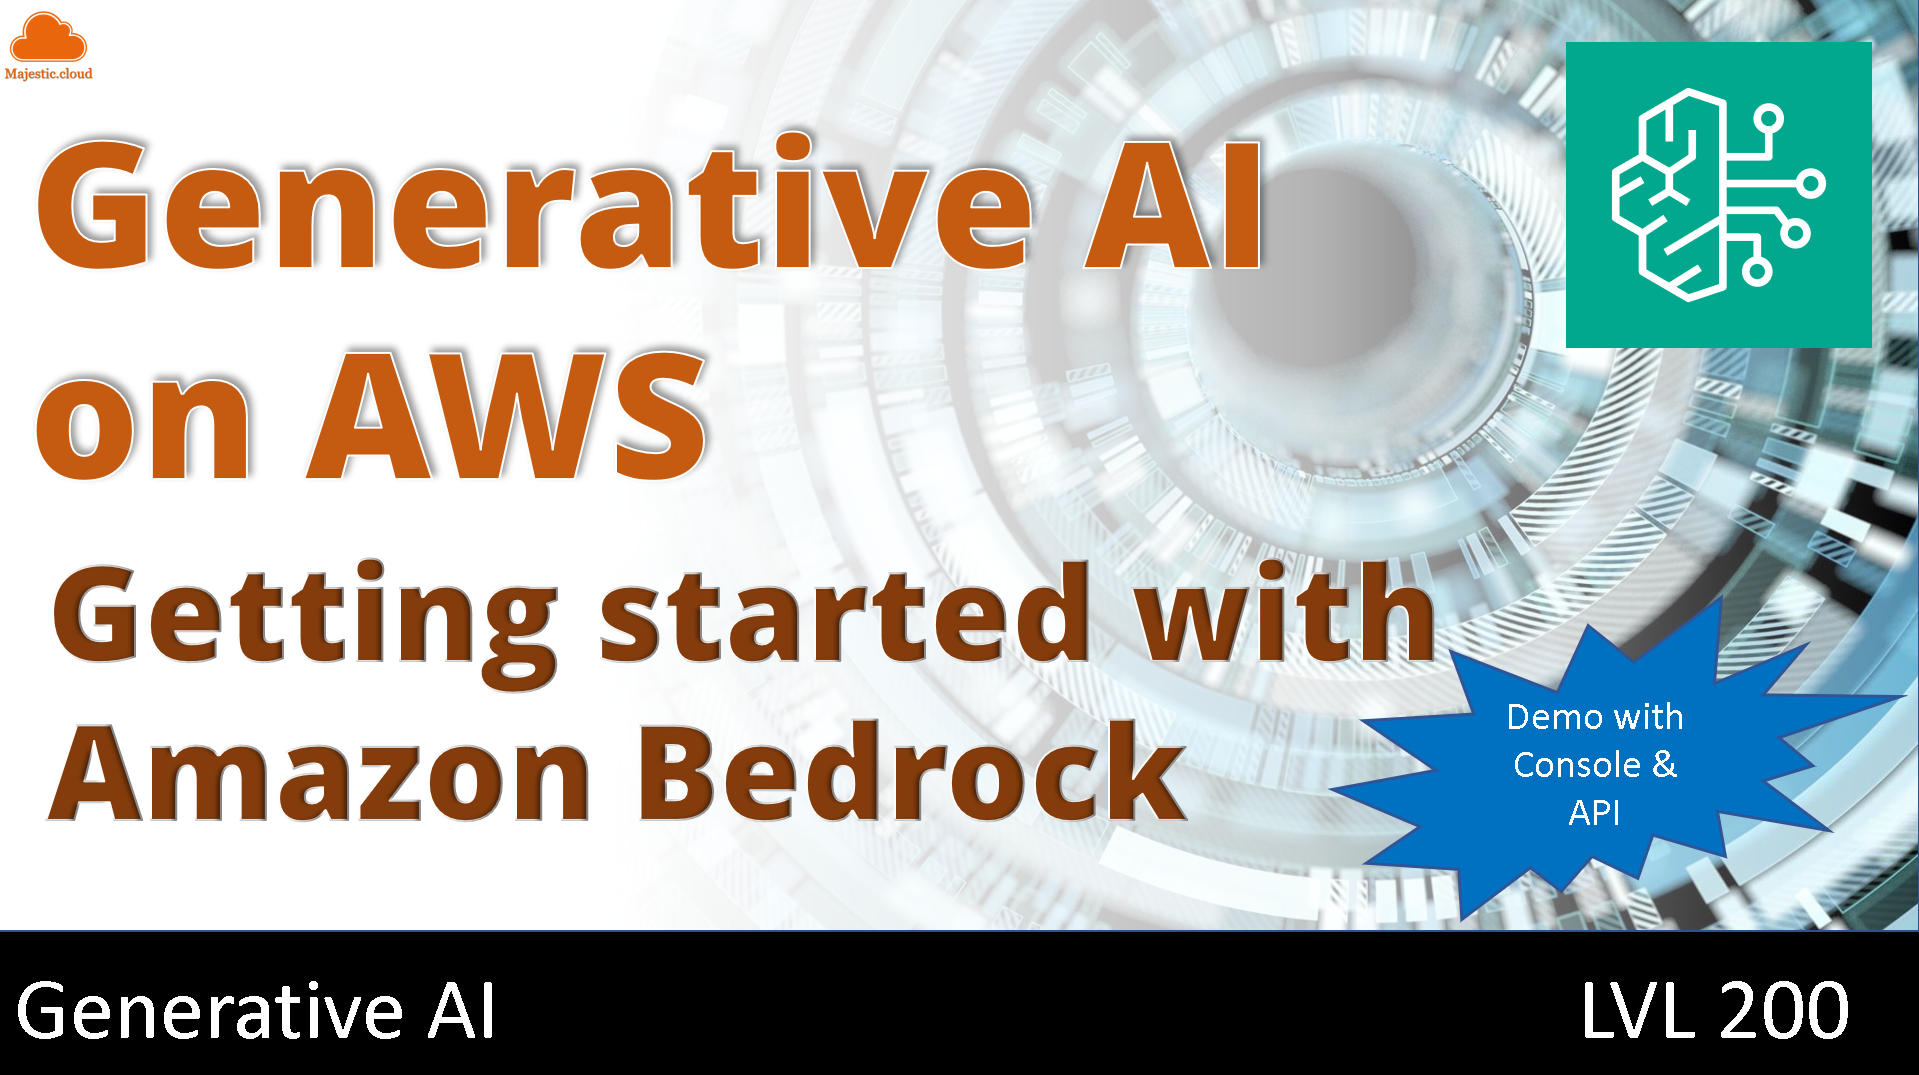 Getting started with Generative AI on AWS with Amazon Bedrock